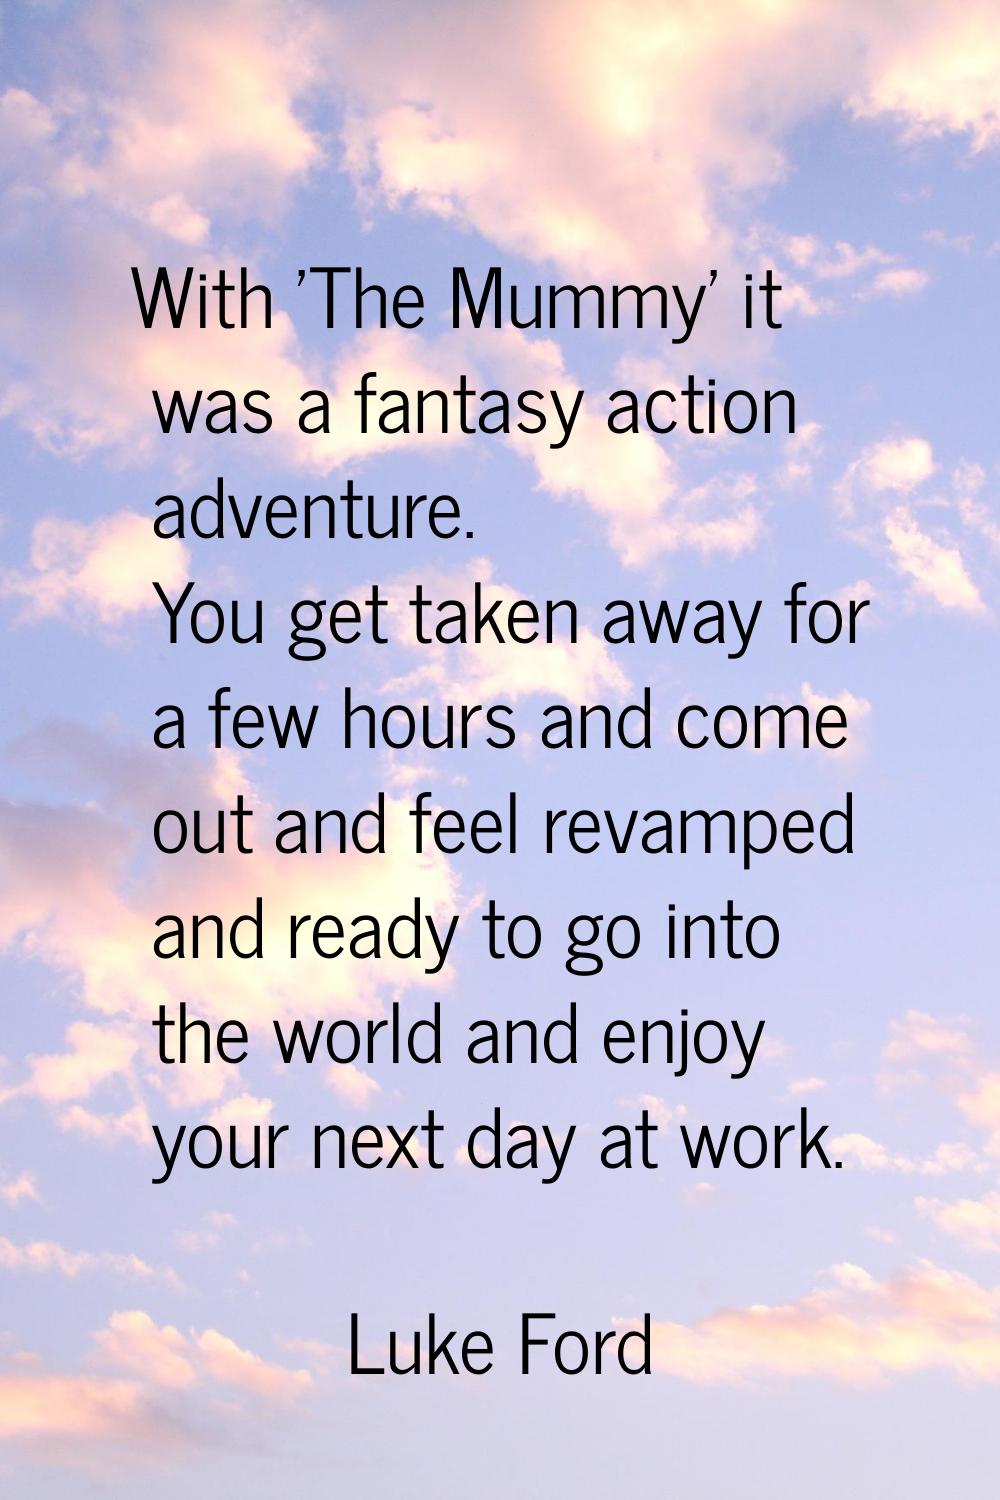 With 'The Mummy' it was a fantasy action adventure. You get taken away for a few hours and come out